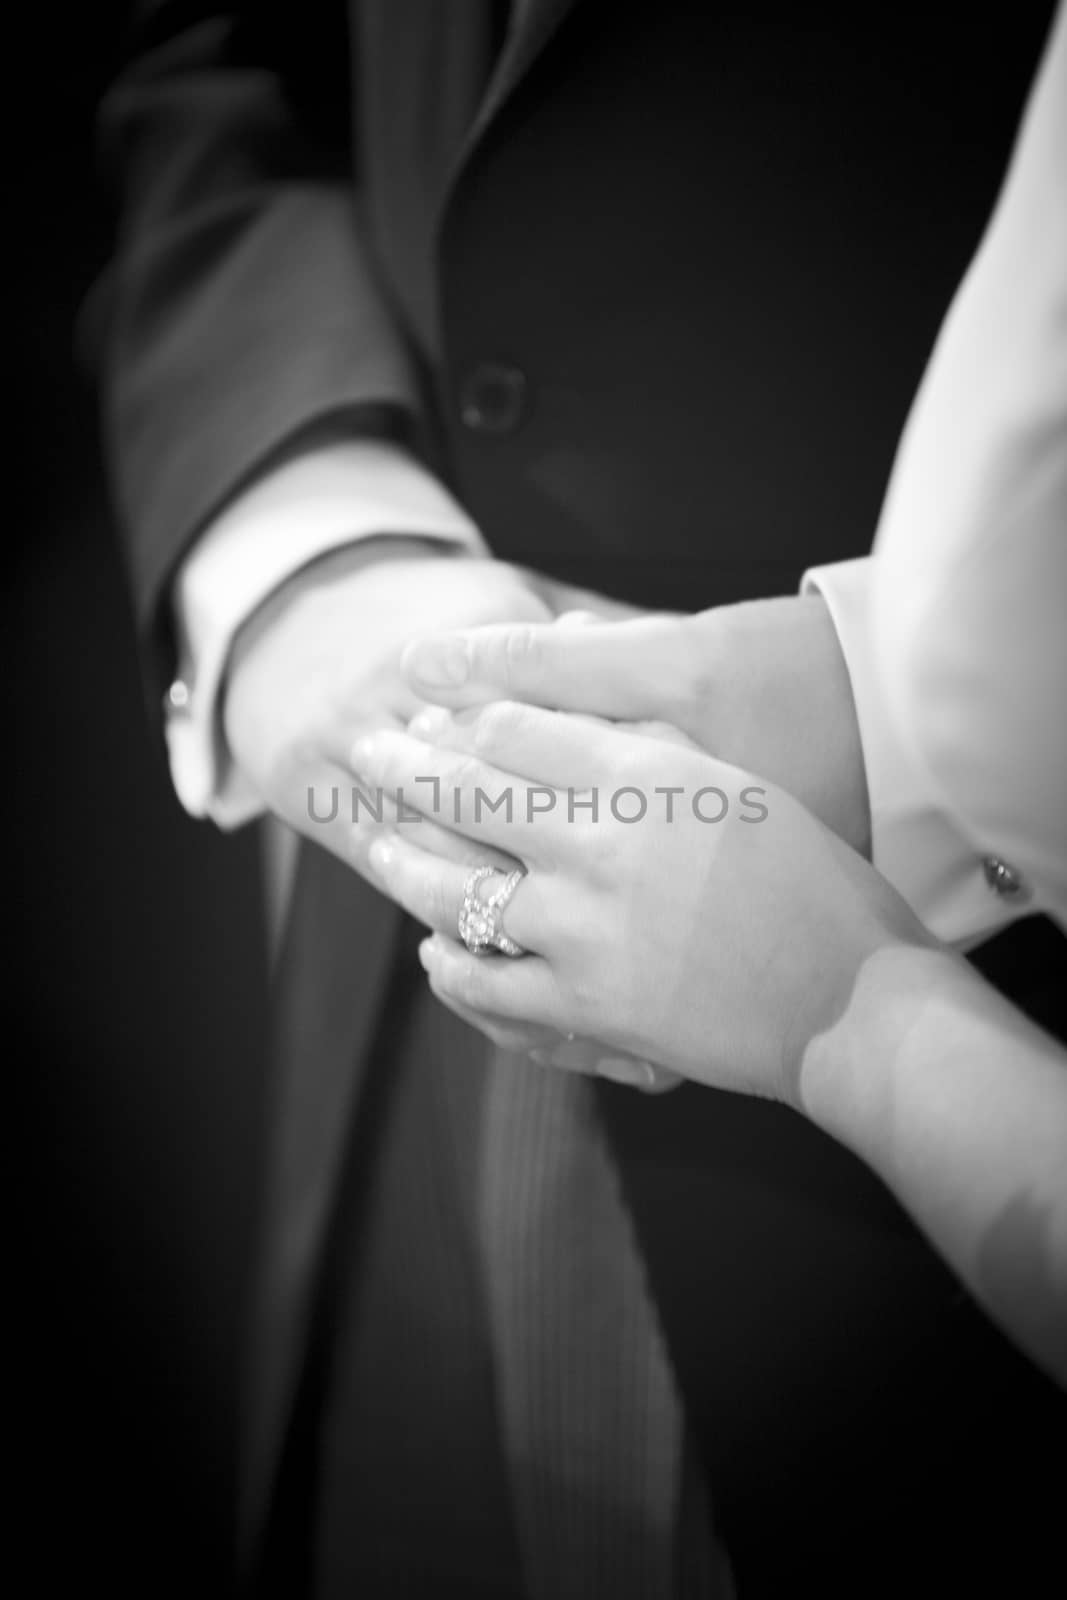 Black and white artistic digital photo of bridegroom in dark suit and white shirt in church religious wedding marriage ceremony holding hands with the bride in white long wedding bridal dress. Shallow depth of with background out of focus. 